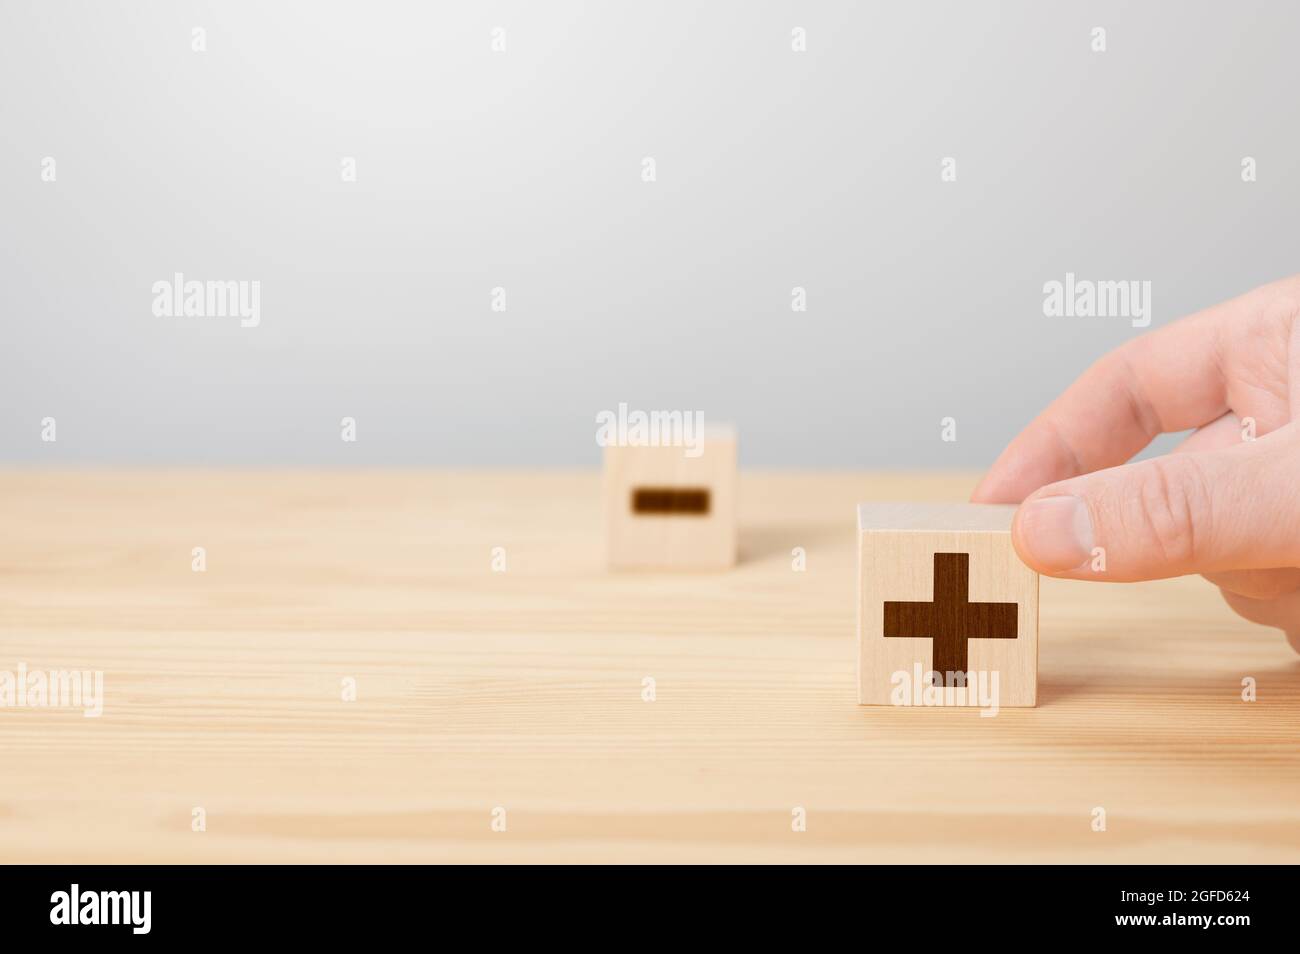 Person Holding Plus Sign Block Against Minus. Plus or minus. man hold cube with plus icon. hand choose wood cube with plus sign. blurred wooden cube w Stock Photo